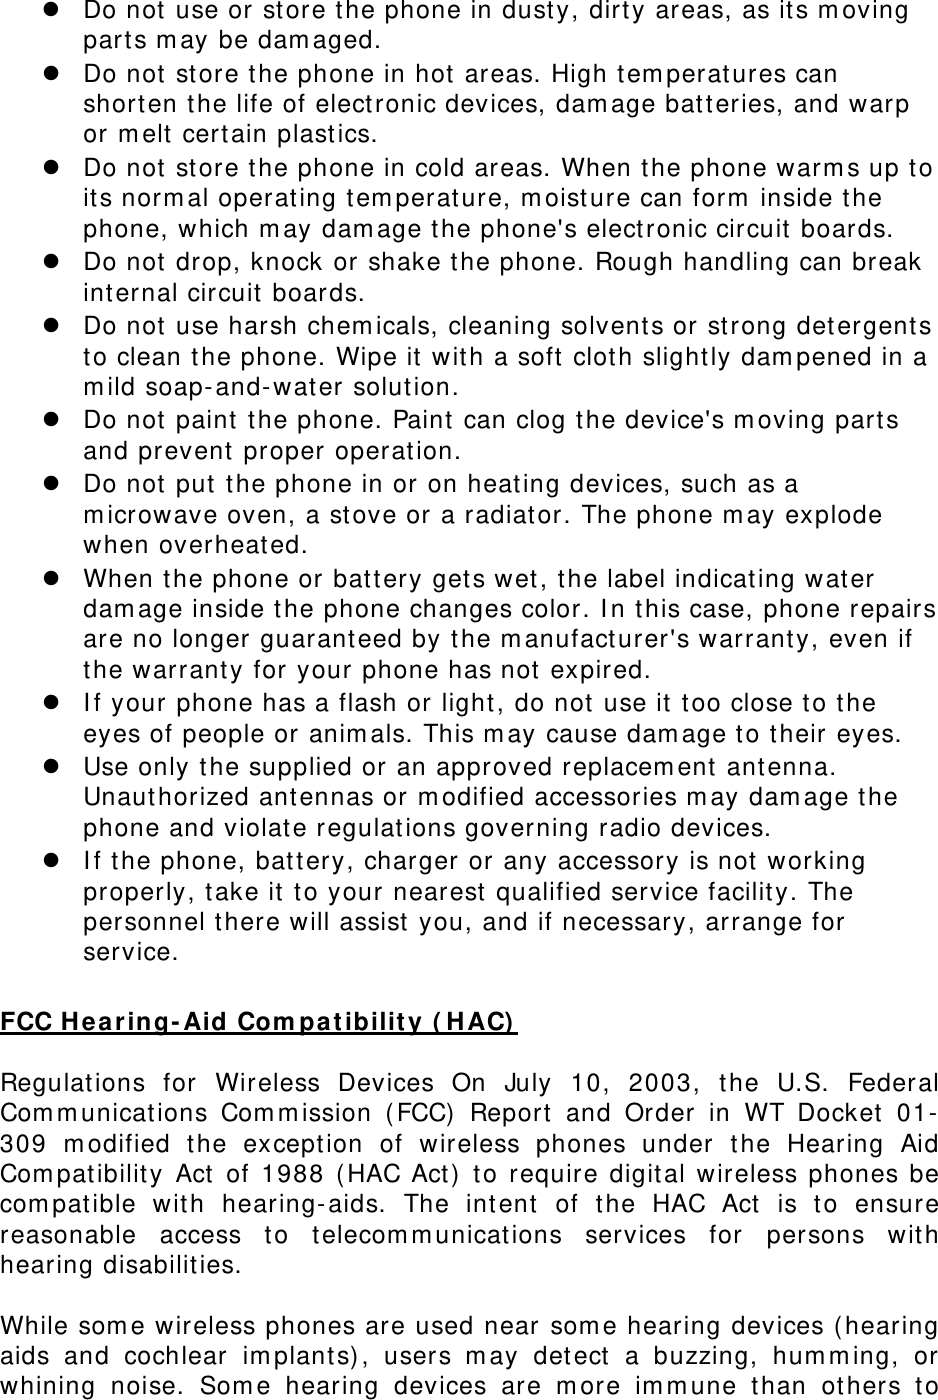  Do not use or st ore t he phone in dust y, dirt y areas, as its m oving part s m ay be dam aged.  Do not store the phone in hot areas. High t em perat ures can short en the life of elect ronic devices, dam age bat teries, and warp or m elt cert ain plast ics.  Do not store the phone in cold areas. When t he phone warm s up t o it s norm al operating tem perat ure, m oist ure can for m  inside the phone, which m ay dam age t he phone&apos;s elect ronic circuit  boards.  Do not drop, knock or shake the phone. Rough handling can break int ernal circuit  boards.  Do not use harsh chem icals, cleaning solvents or st rong det ergent s to clean t he phone. Wipe it  w it h a soft clot h slightly dam pened in a m ild soap-and-water solution.  Do not paint  t he phone. Paint  can clog the device&apos;s m oving part s and prevent proper operat ion.  Do not put  t he phone in or on heat ing devices, such as a m icrowave oven, a stove or a radiator. The phone m ay explode when overheated.  When t he phone or bat t ery get s wet , t he label indicat ing water dam age inside t he phone changes color. I n t his case, phone repairs are no longer guarant eed by t he m anufacturer&apos;s warrant y, even if the warranty for your phone has not  expired.    I f your  phone has a flash or light , do not  use it too close t o t he eyes of people or anim als. This m ay cause dam age t o t heir eyes.  Use only t he supplied or an approved replacem ent antenna. Unaut horized antennas or m odified accessories m ay dam age t he phone and violate regulat ions governing radio devices.  I f the phone, bat t ery, charger or any accessory is not working properly, t ake it  to your nearest qualified service facilit y. The personnel t here will assist  you, and if necessary, arrange for service.  FCC Hea r ing- Aid Com pa t ibilit y ( HAC)   Regulations for Wireless Devices On July 10, 2003, the U.S. Federal Com m unications Com m ission ( FCC) Report  and Order in WT Docket  01-309 m odified t he except ion of wireless phones under t he Hear ing Aid Com pat ibilit y Act  of 1988 ( HAC Act)  t o require digit al wireless phones be com pat ible wit h hearing-aids. The int ent  of t he HAC Act  is t o ensure reasonable access t o telecom m unicat ions services for persons wit h hearing disabilit ies.    While som e wireless phones are used near  som e hearing devices ( hearing aids and cochlear im plant s) , users m ay det ect  a buzzing, hum m ing, or whining noise. Som e hearing devices are m ore im m une t han ot her s t o 